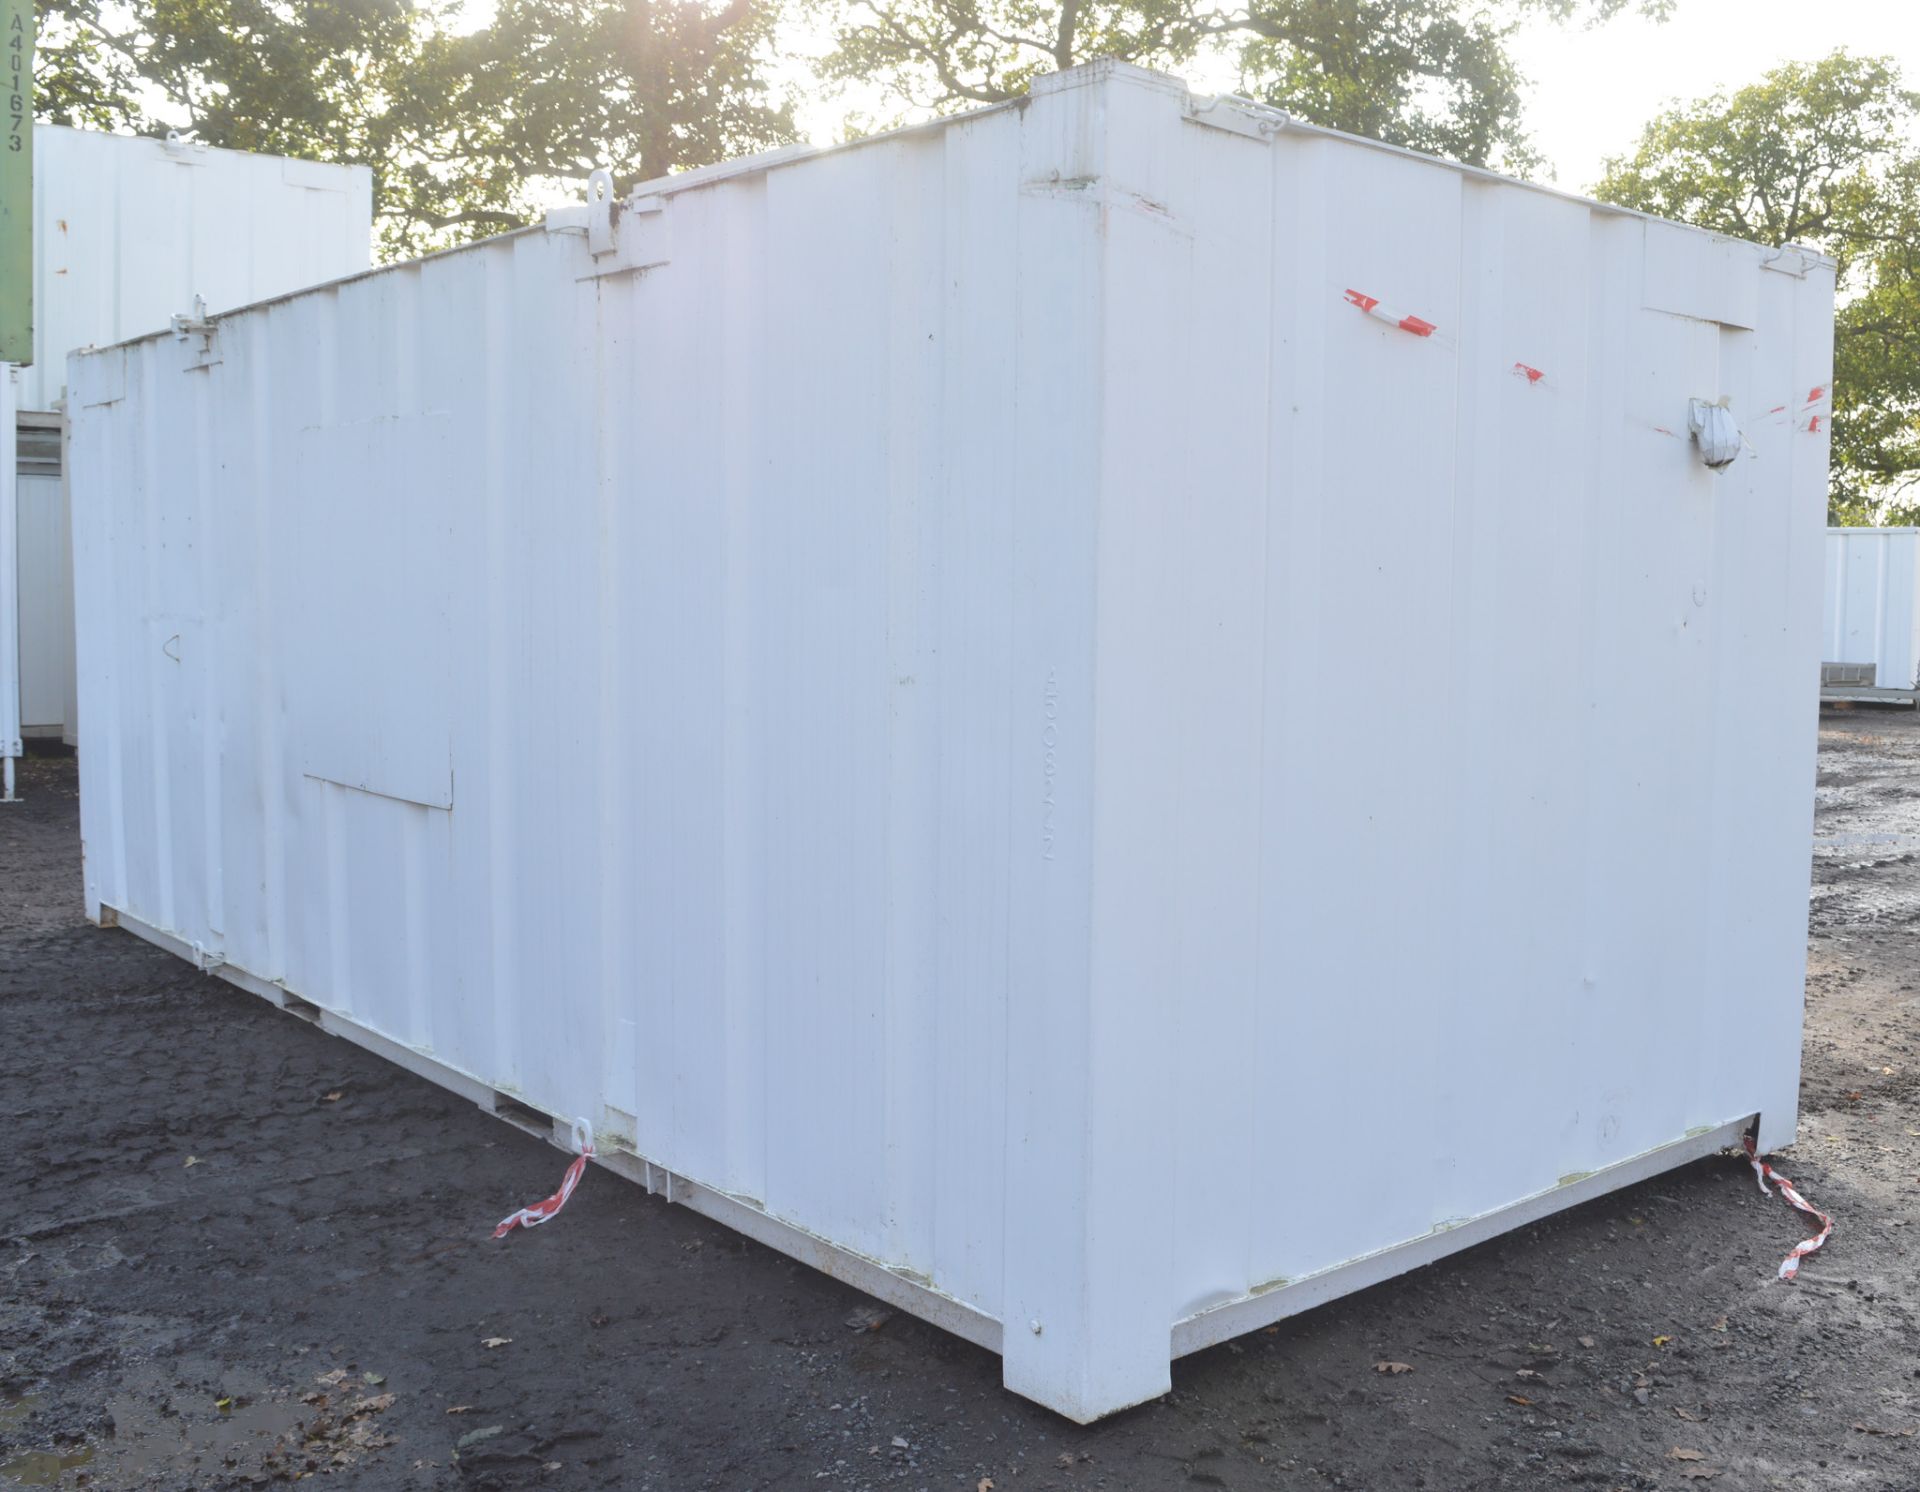 21 ft x 9 ft steel anti vandal shipping container  c/w keys in office  A508242 - Image 2 of 6